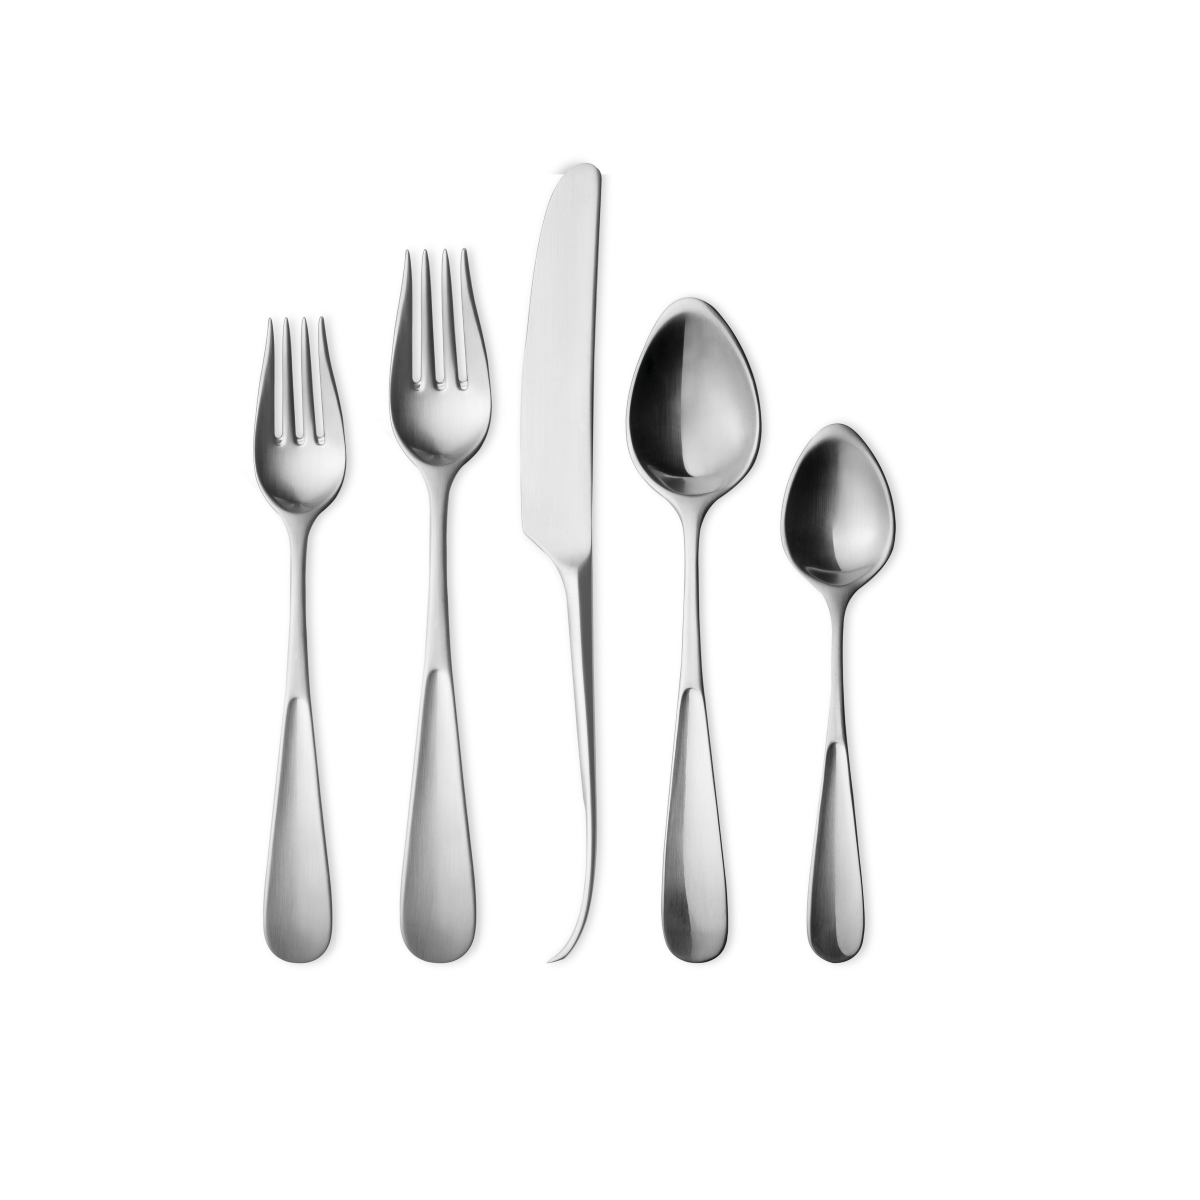 Primary image for Vivianna by Georg Jensen Stainless Steel Service for 4 Set 20 pieces - New